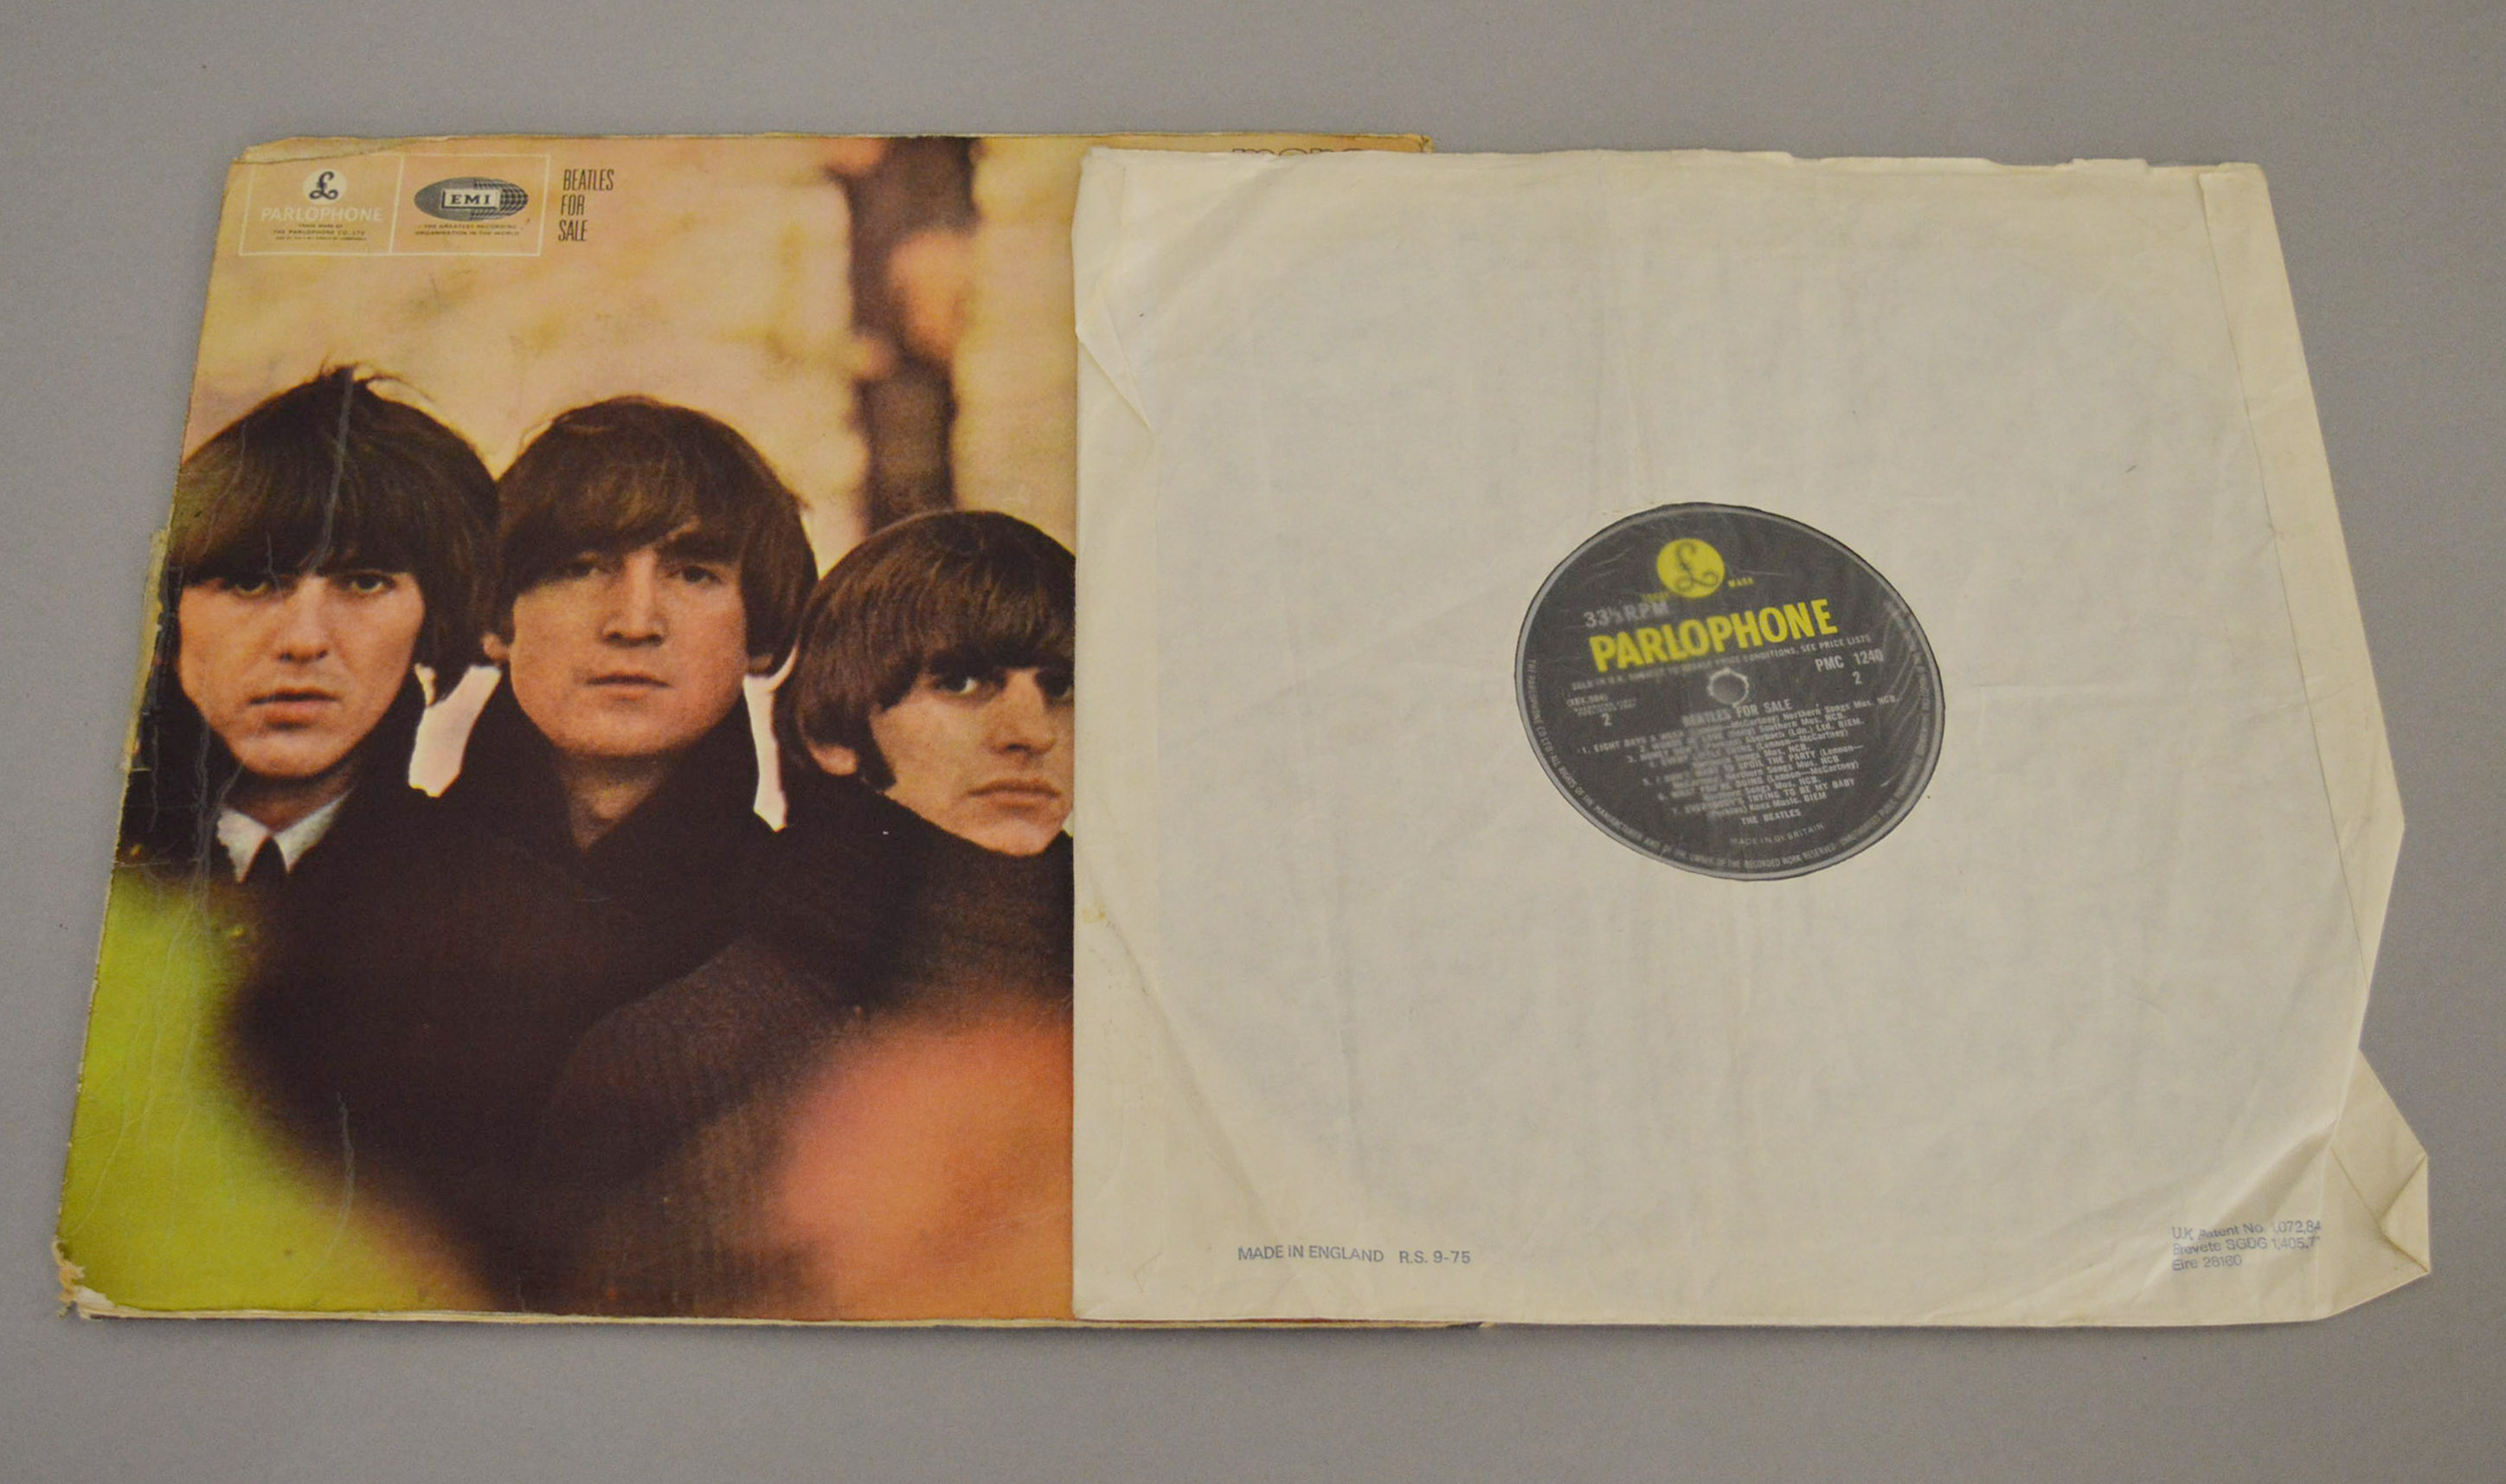 Two The Beatles LP records: "Beatles for Sale" mono PMC1240 and "Revolver"mono PMC7009 printed by - Image 4 of 9